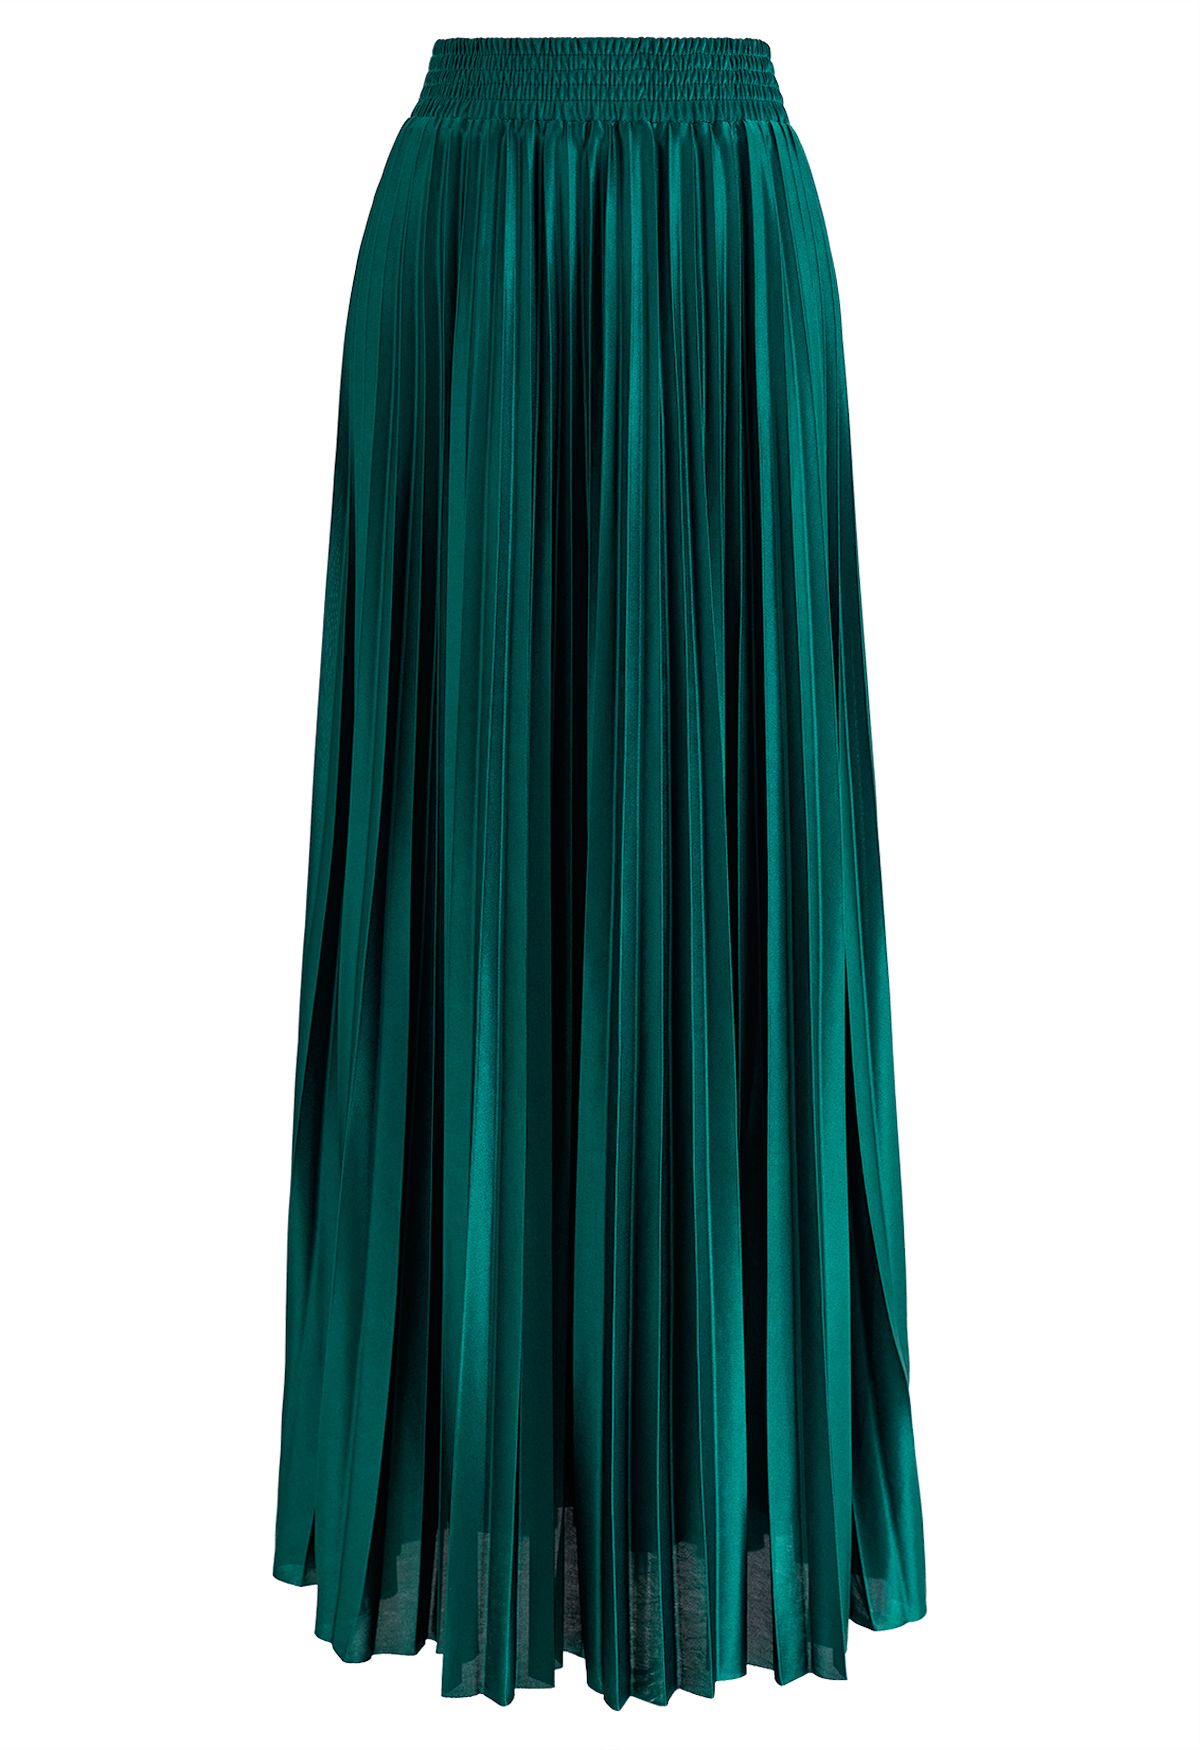 Glossy Pleated Maxi Skirt in Emerald